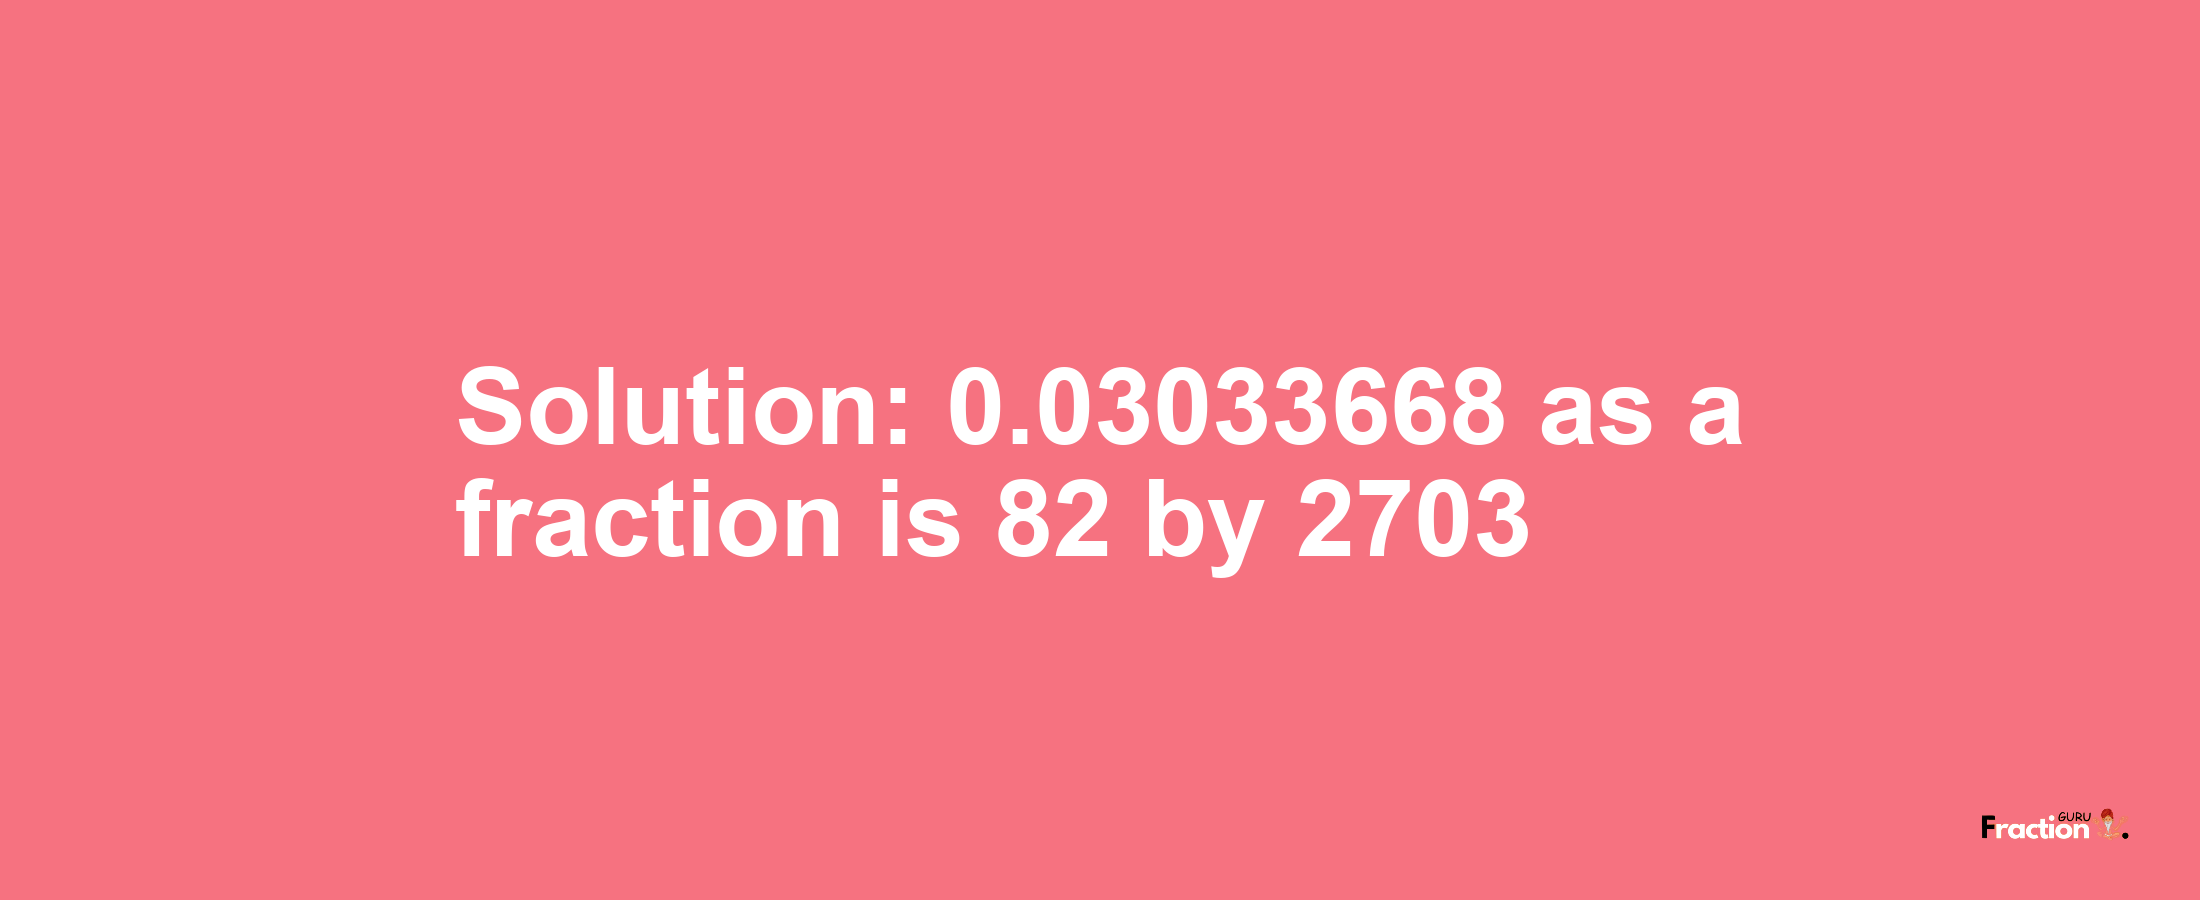 Solution:0.03033668 as a fraction is 82/2703